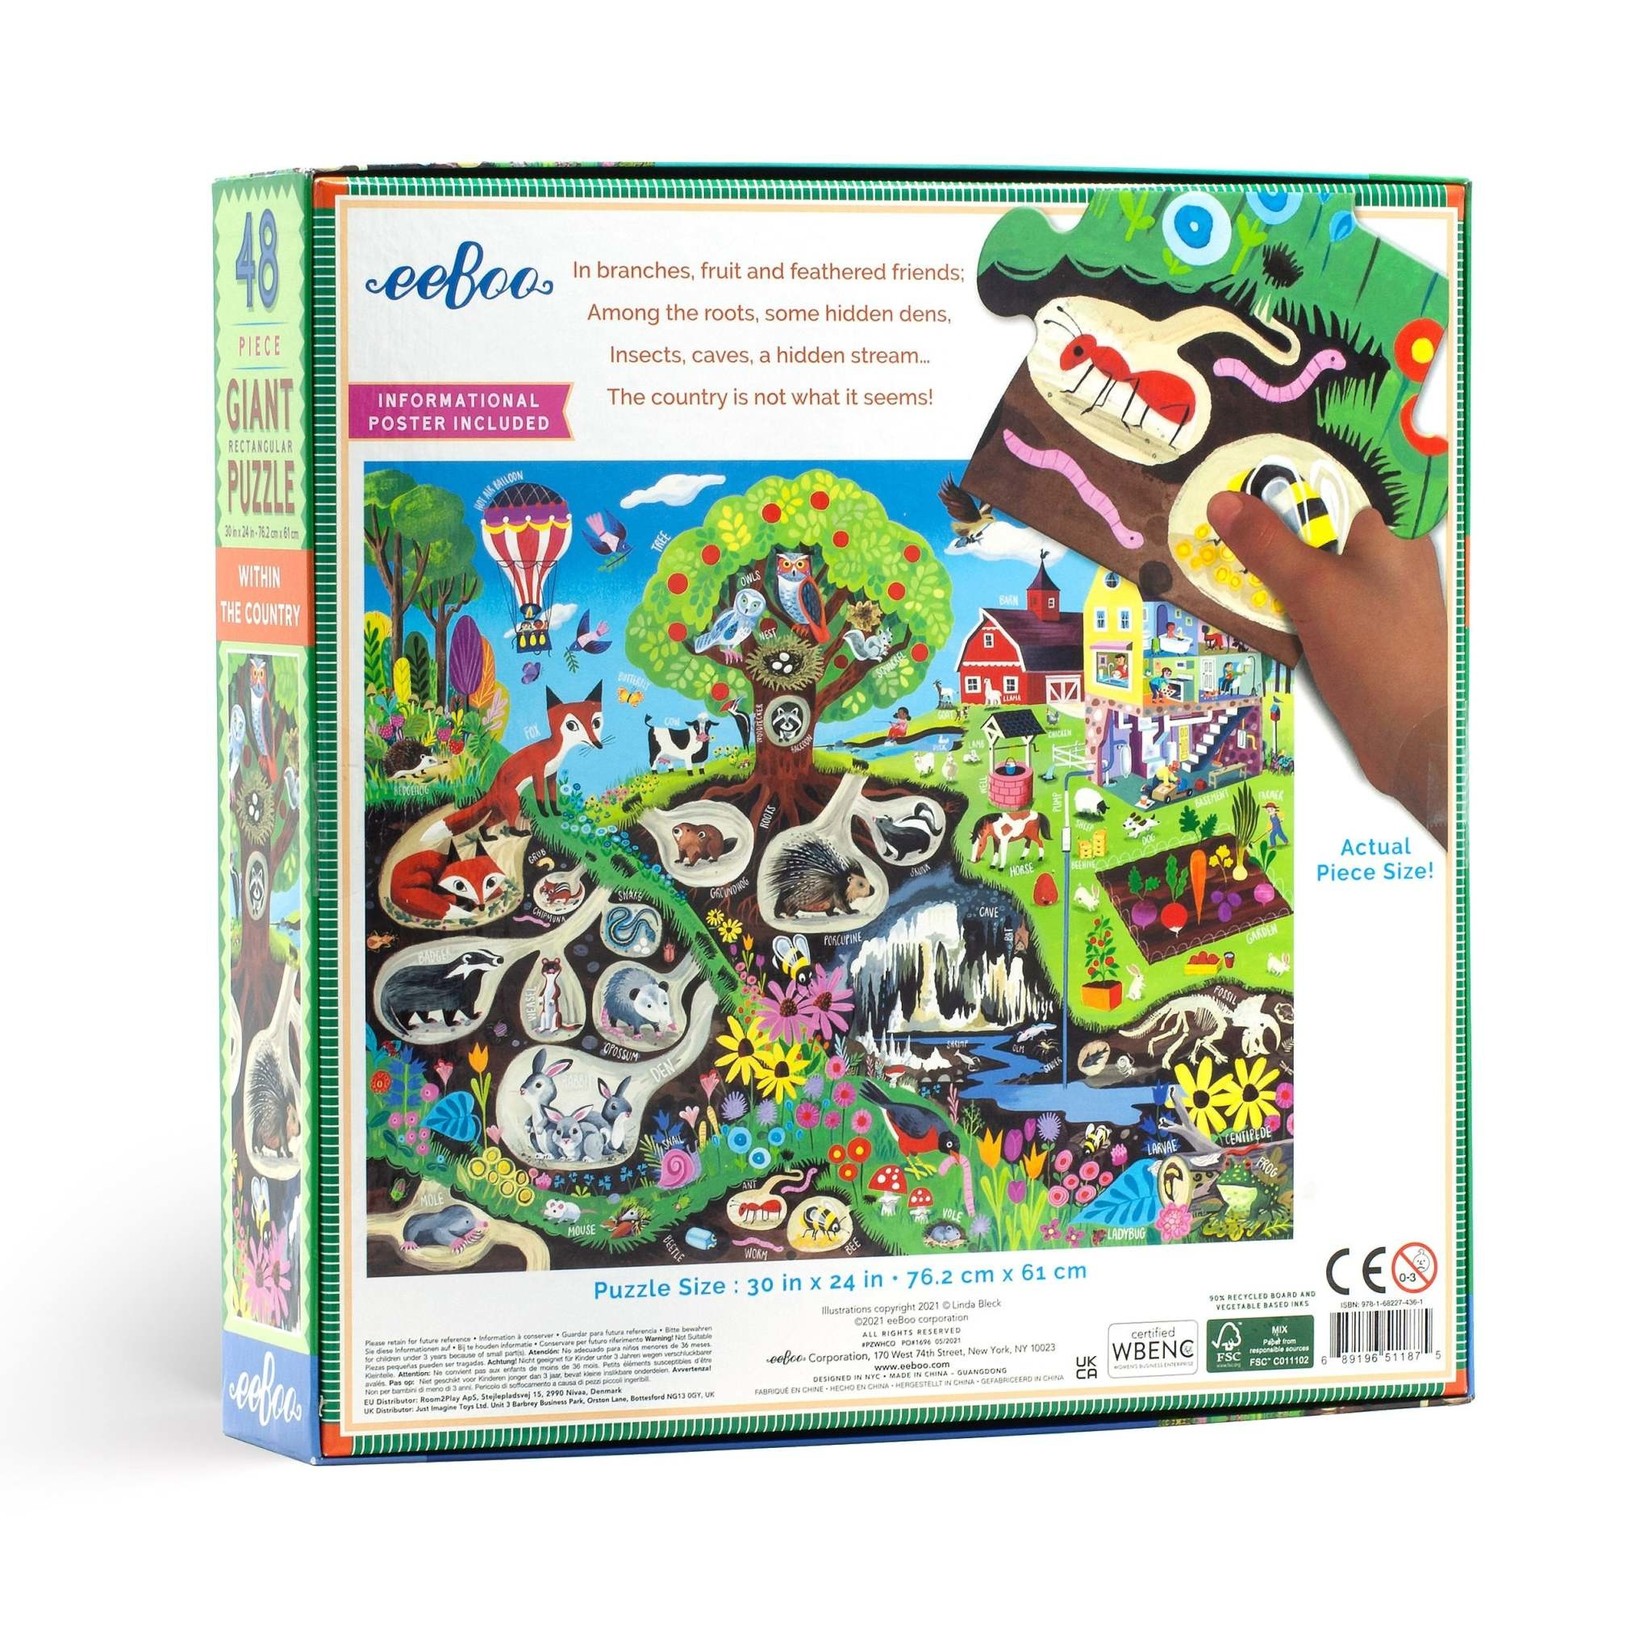 eeboo Within the Country 48 Piece Giant Puzzle